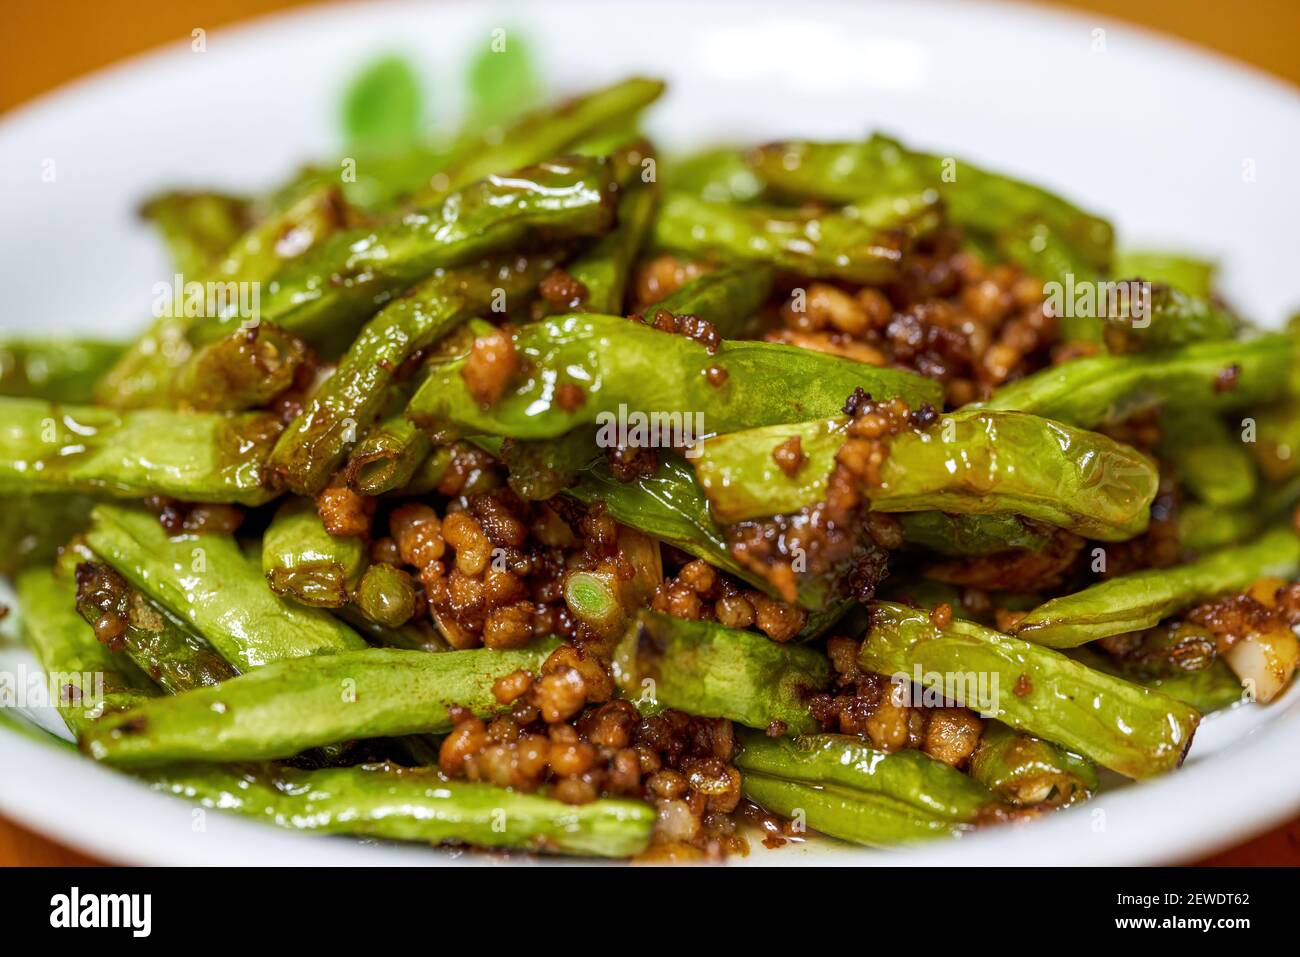 Classic Chinese cooking, stir-fried green beans Stock Photo